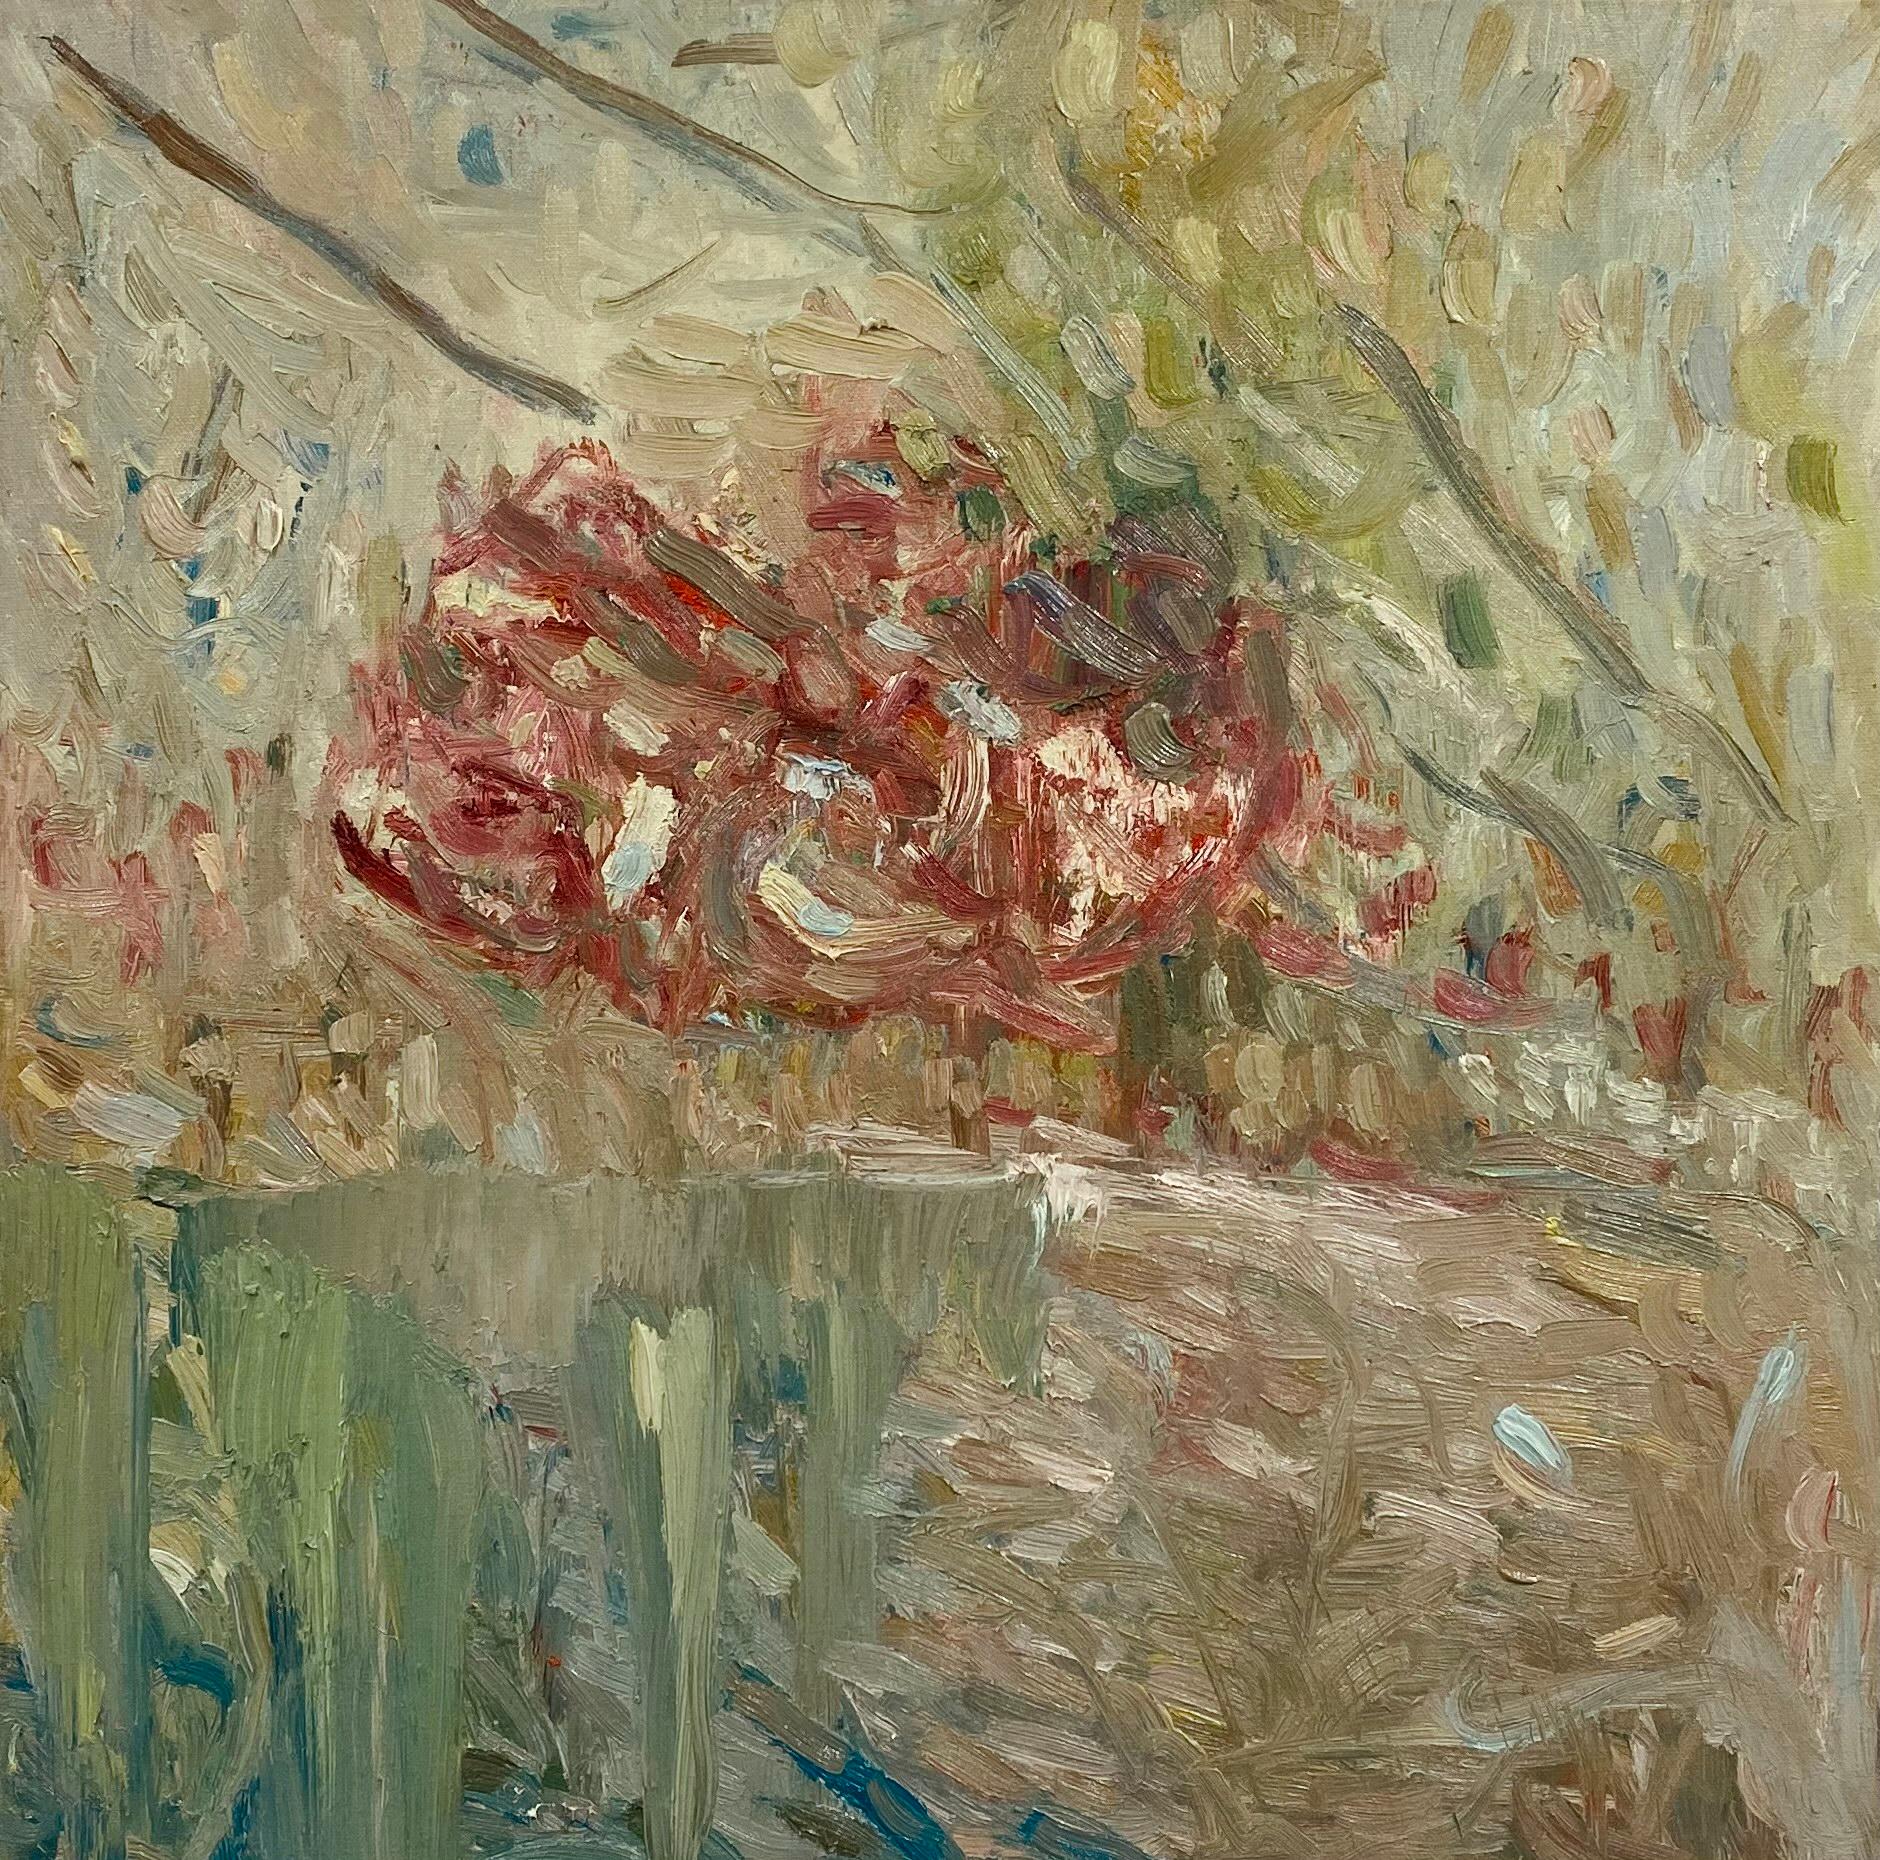 FRANCESCA OWEN  Abstract Painting – Roses In Bloom By The Lake. Abstrakt-expressionistisches Ölgemälde